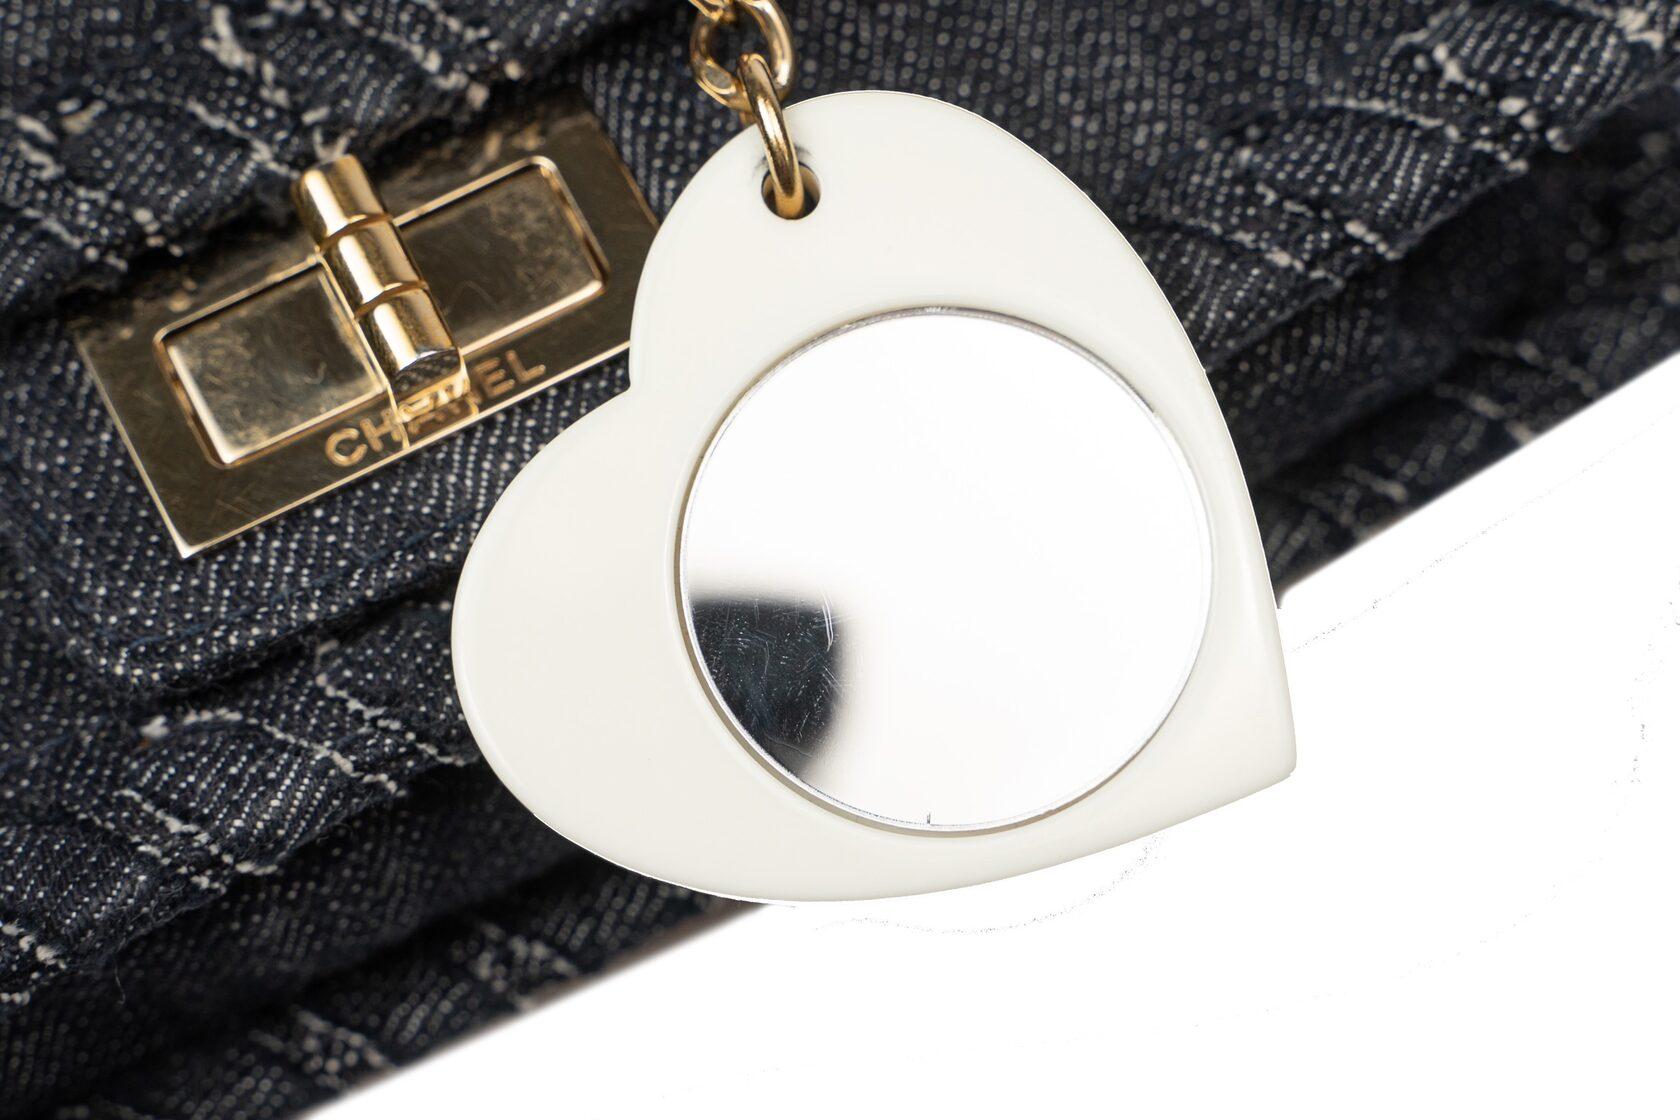 Excellent condition with few signs of use; carefully kept.
SET: dustbag, keychain in the shape of a heart with a mirror
SIZE: 21/18/5 cm
MODEL: 2.55 
Dark-blue colour
MATERIAL: Denim/Jeans
INSIDE COLOR: Beige
INSIDE MATERIAL: Beige
HARDWARE: